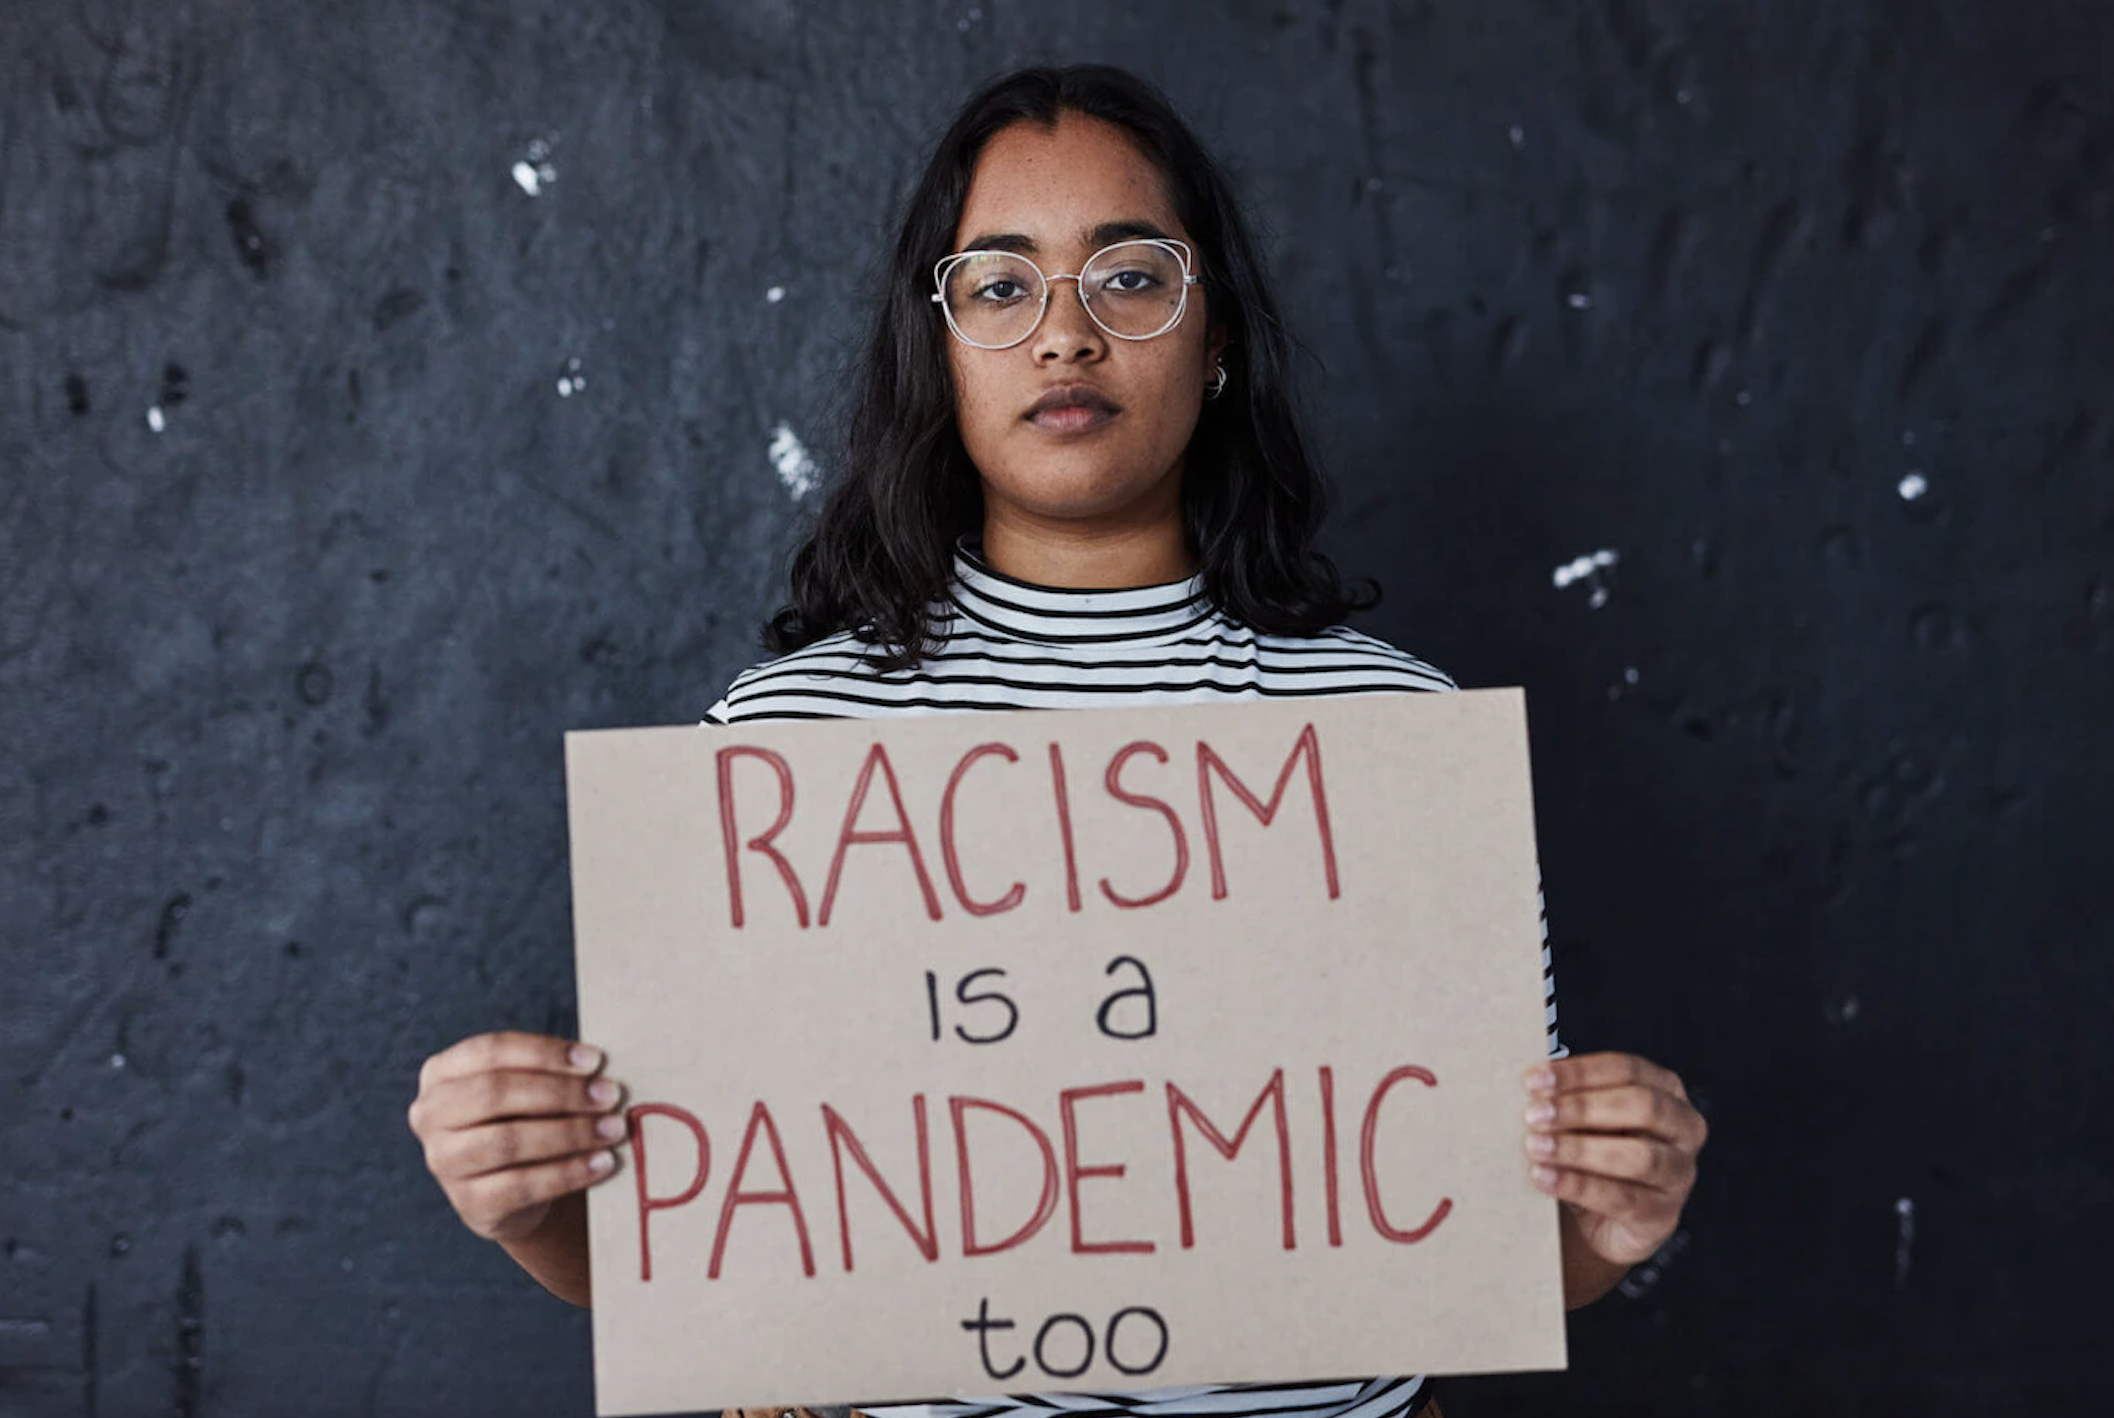 Person holding cardboard sign that reads "racism is a pandemic too"